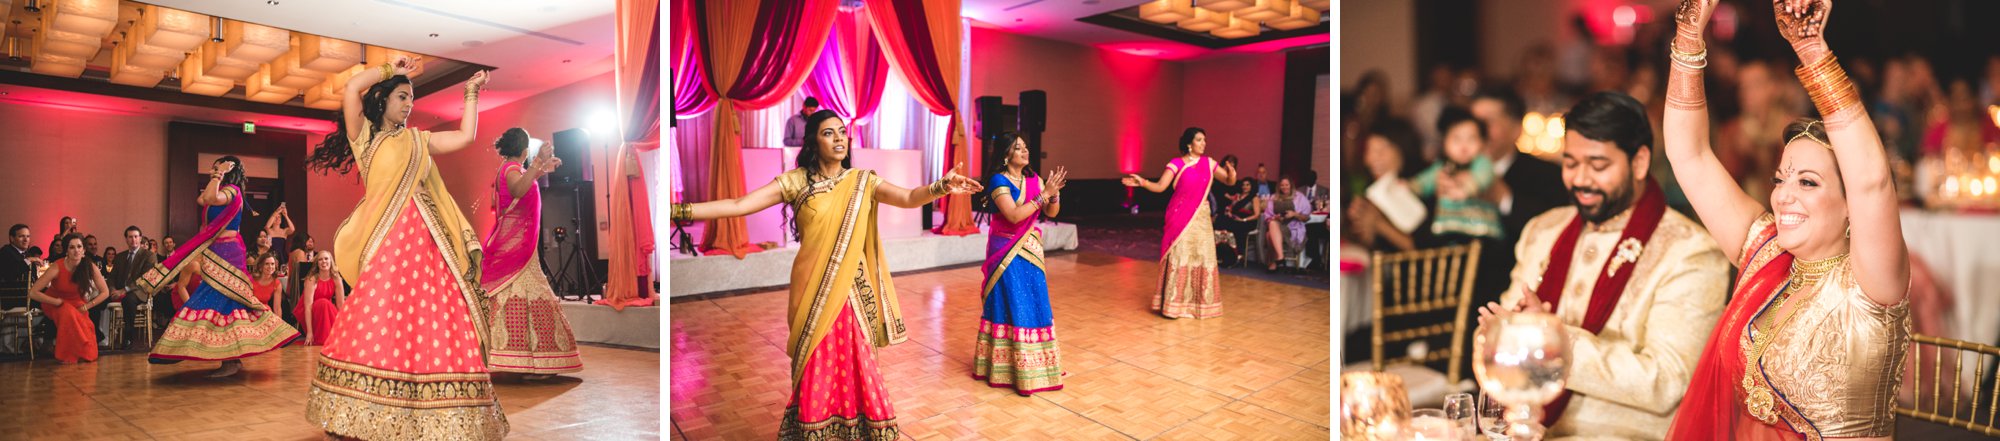 Washington DC colorful Indian wedding with a feminist bride. Traditional dance.